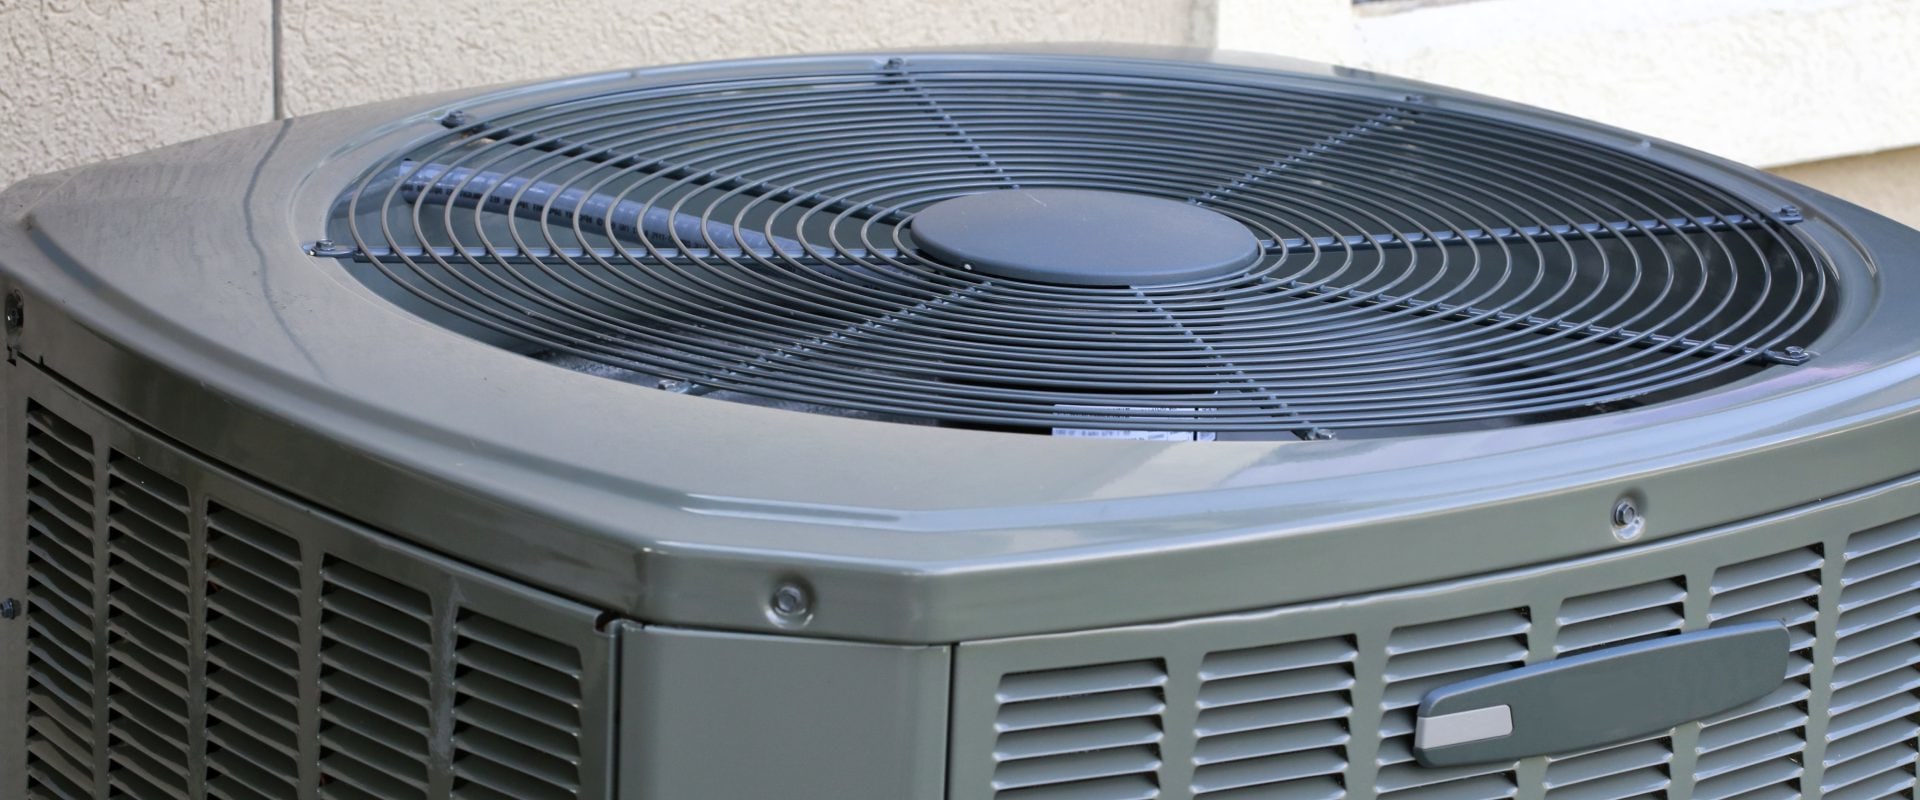 How Often Should You Service Your AC in Florida?